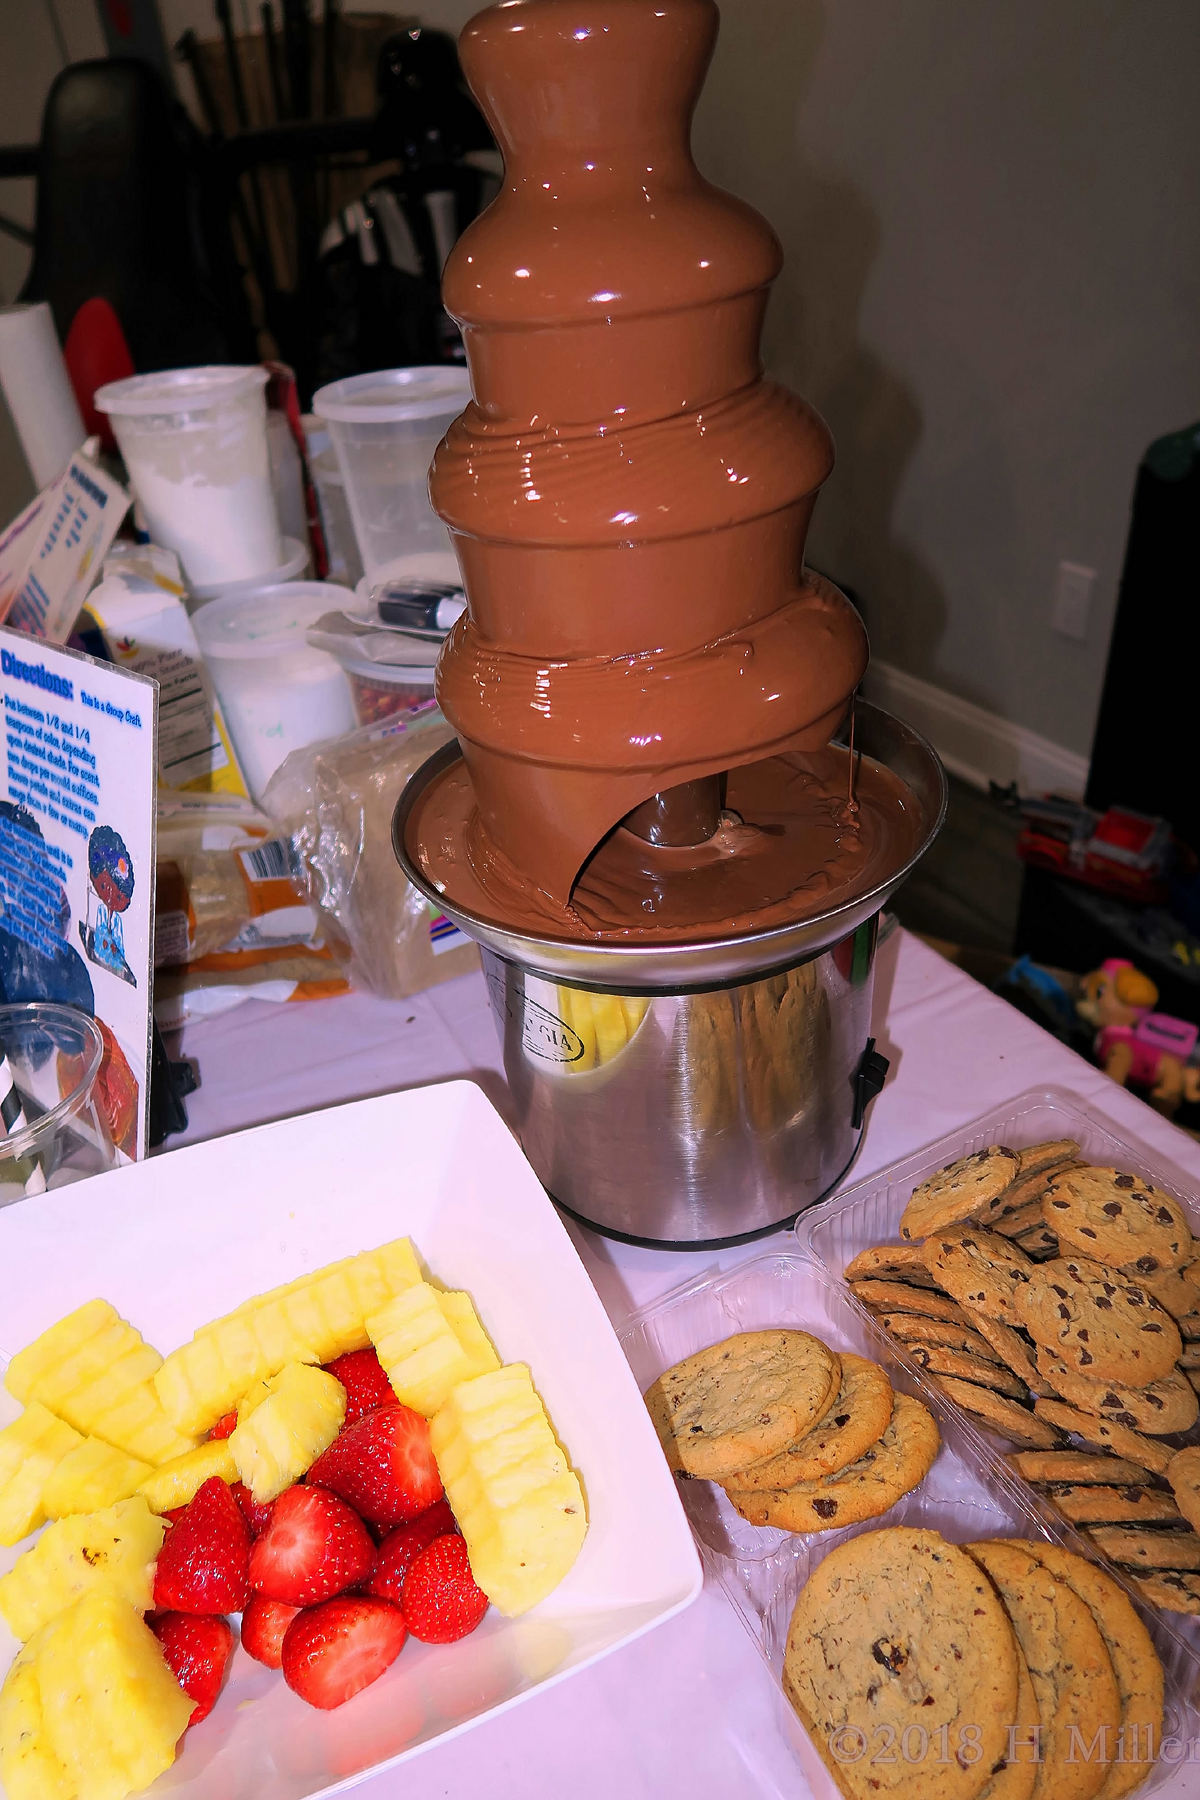 Dipping And Dunking! Delicious Snacks For The Chocolate Fondue Fountain! 